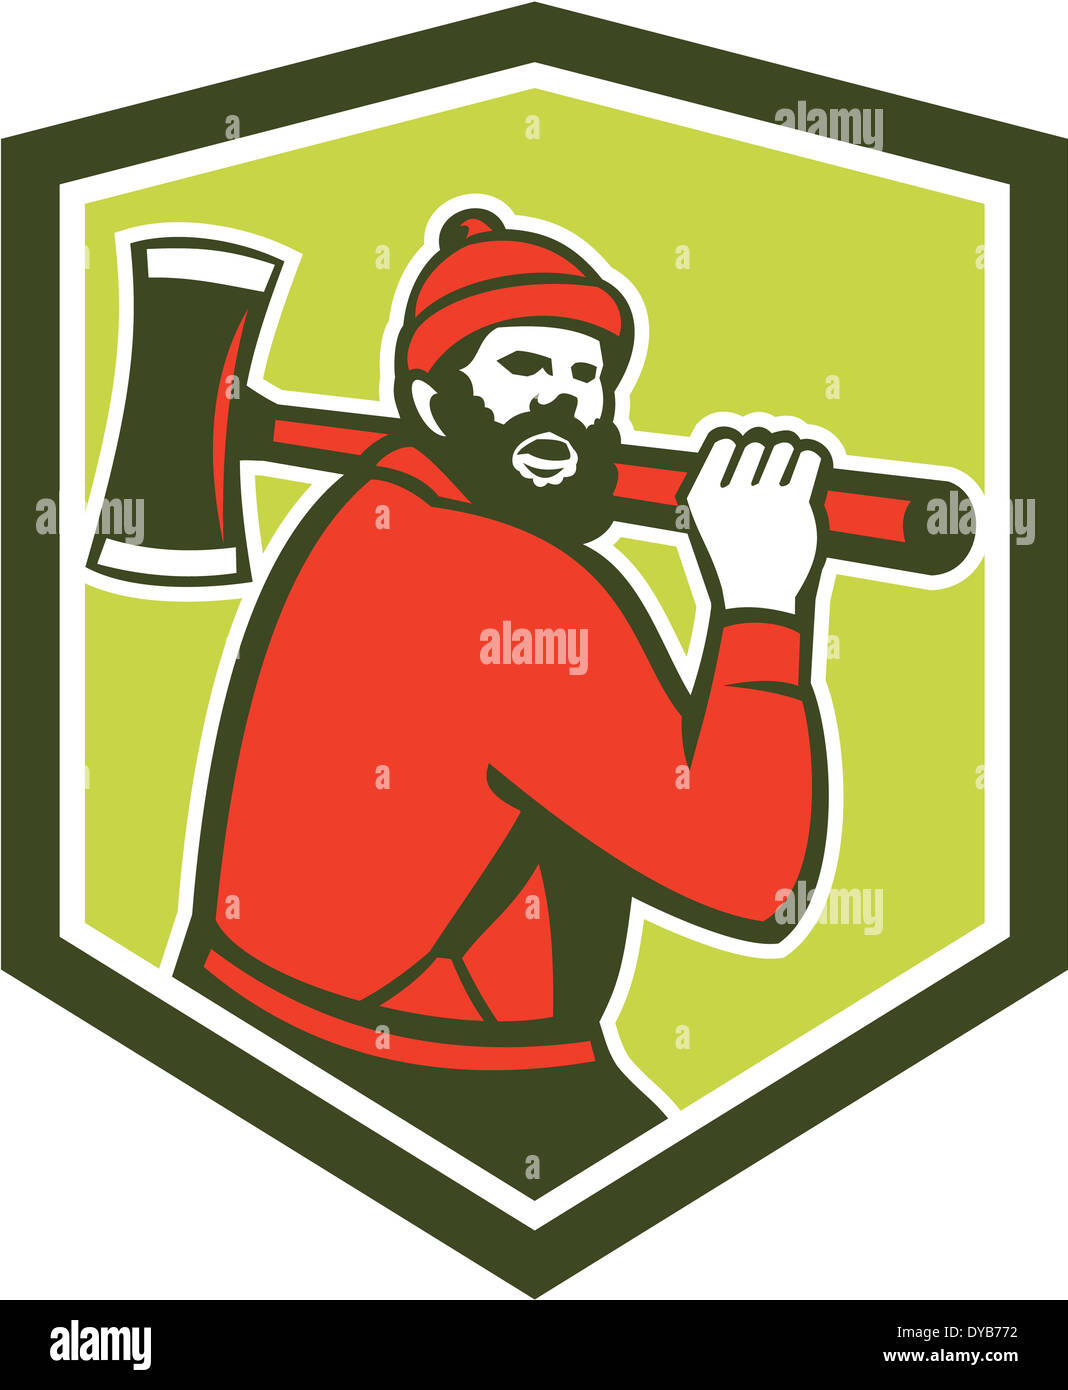 Illustration of Paul Bunyan a lumberjack sawyer forest worker carrying an axe set inside shield crest shape done in retro style Stock Photo